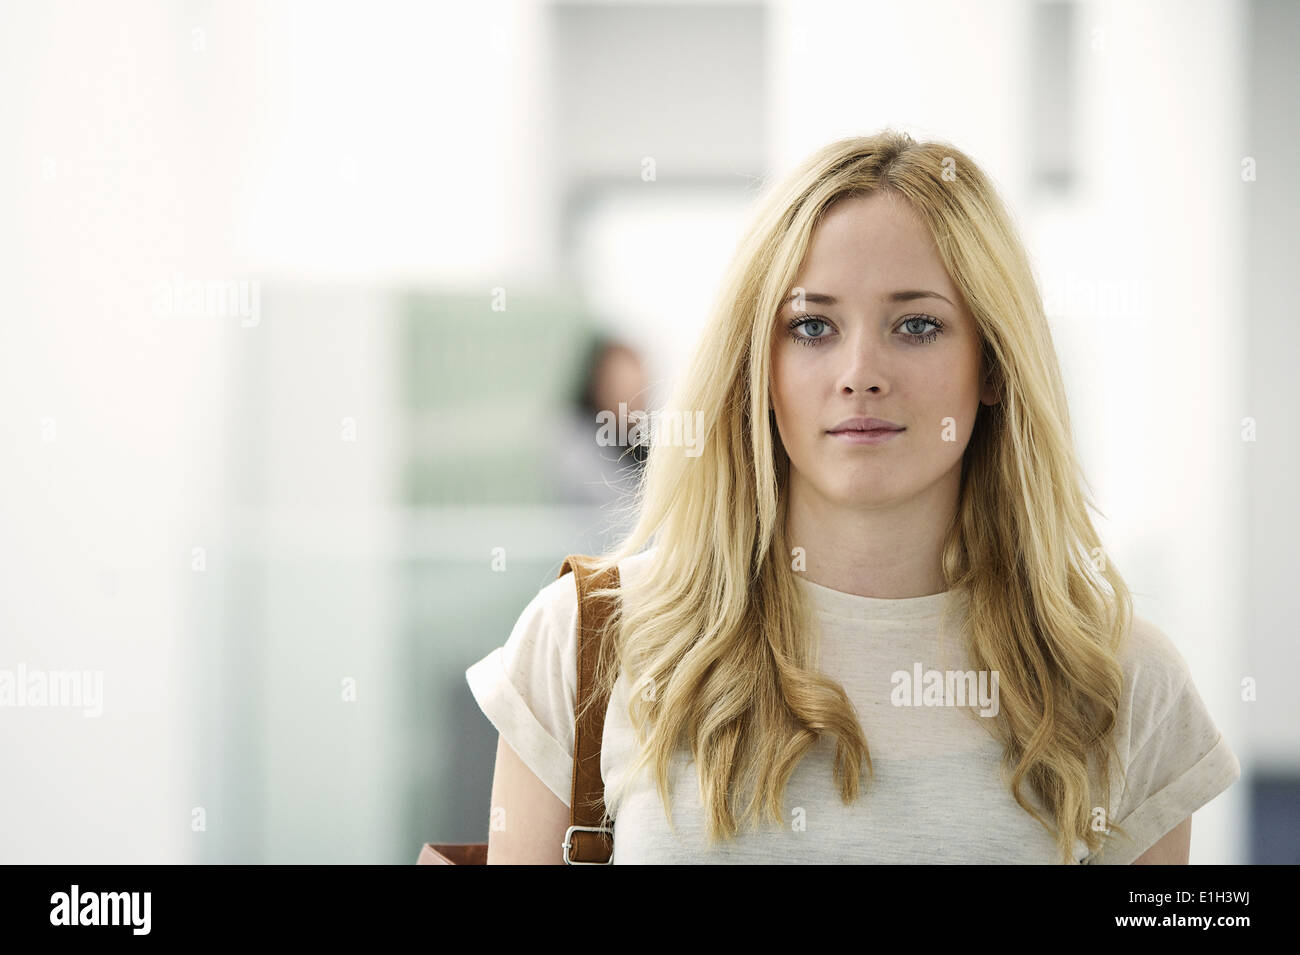 Portrait of young woman with long blonde hair Stock Photo